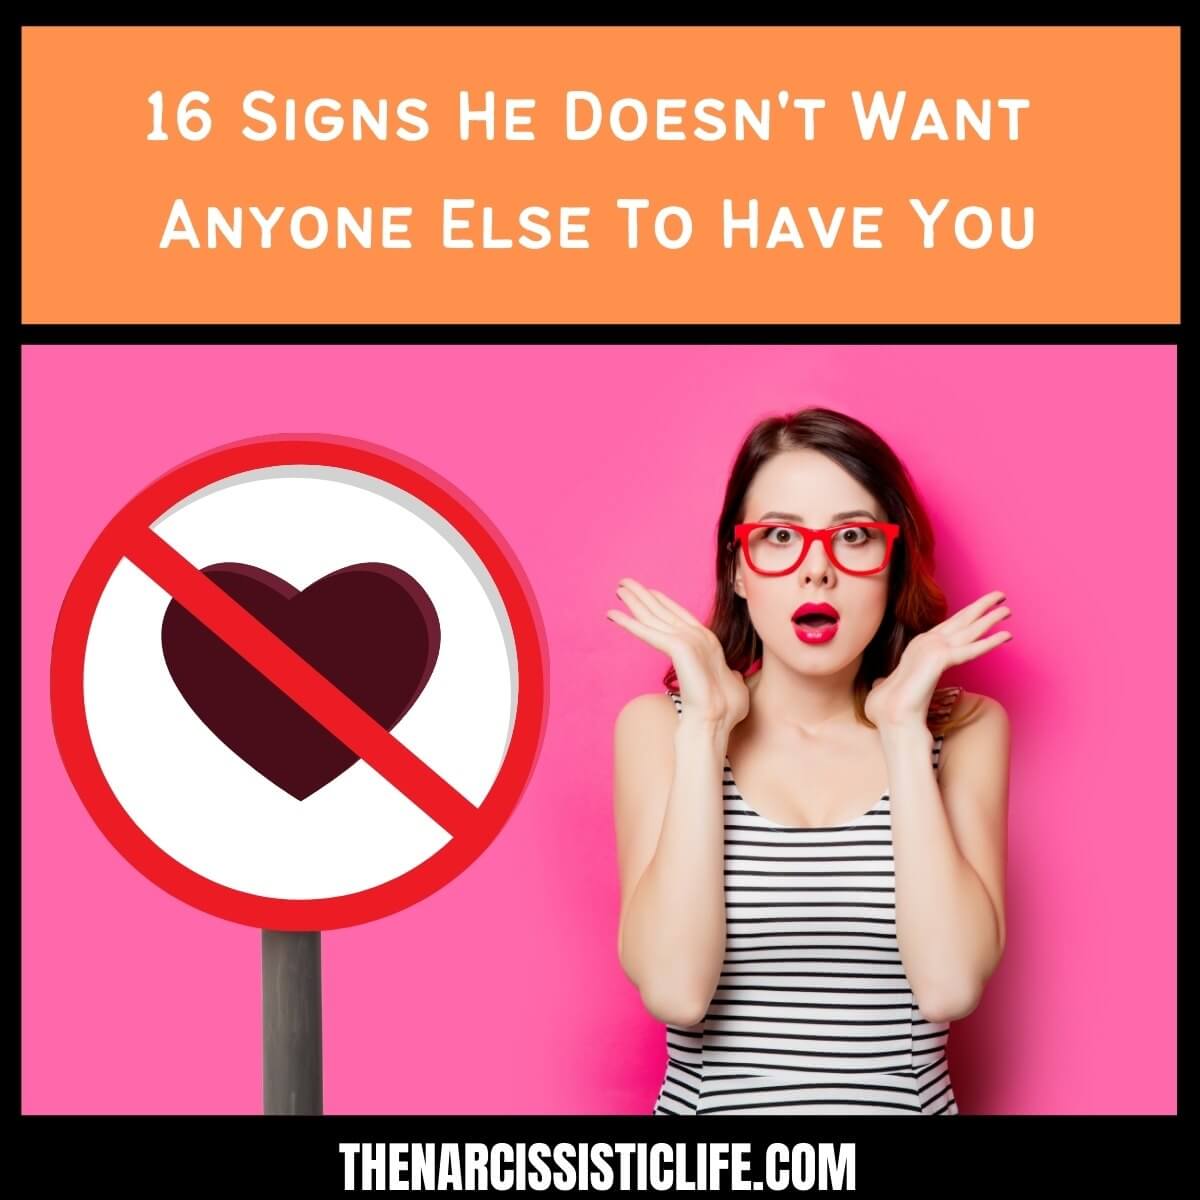 Signs He Doesn't Want Anyone Else To Have You